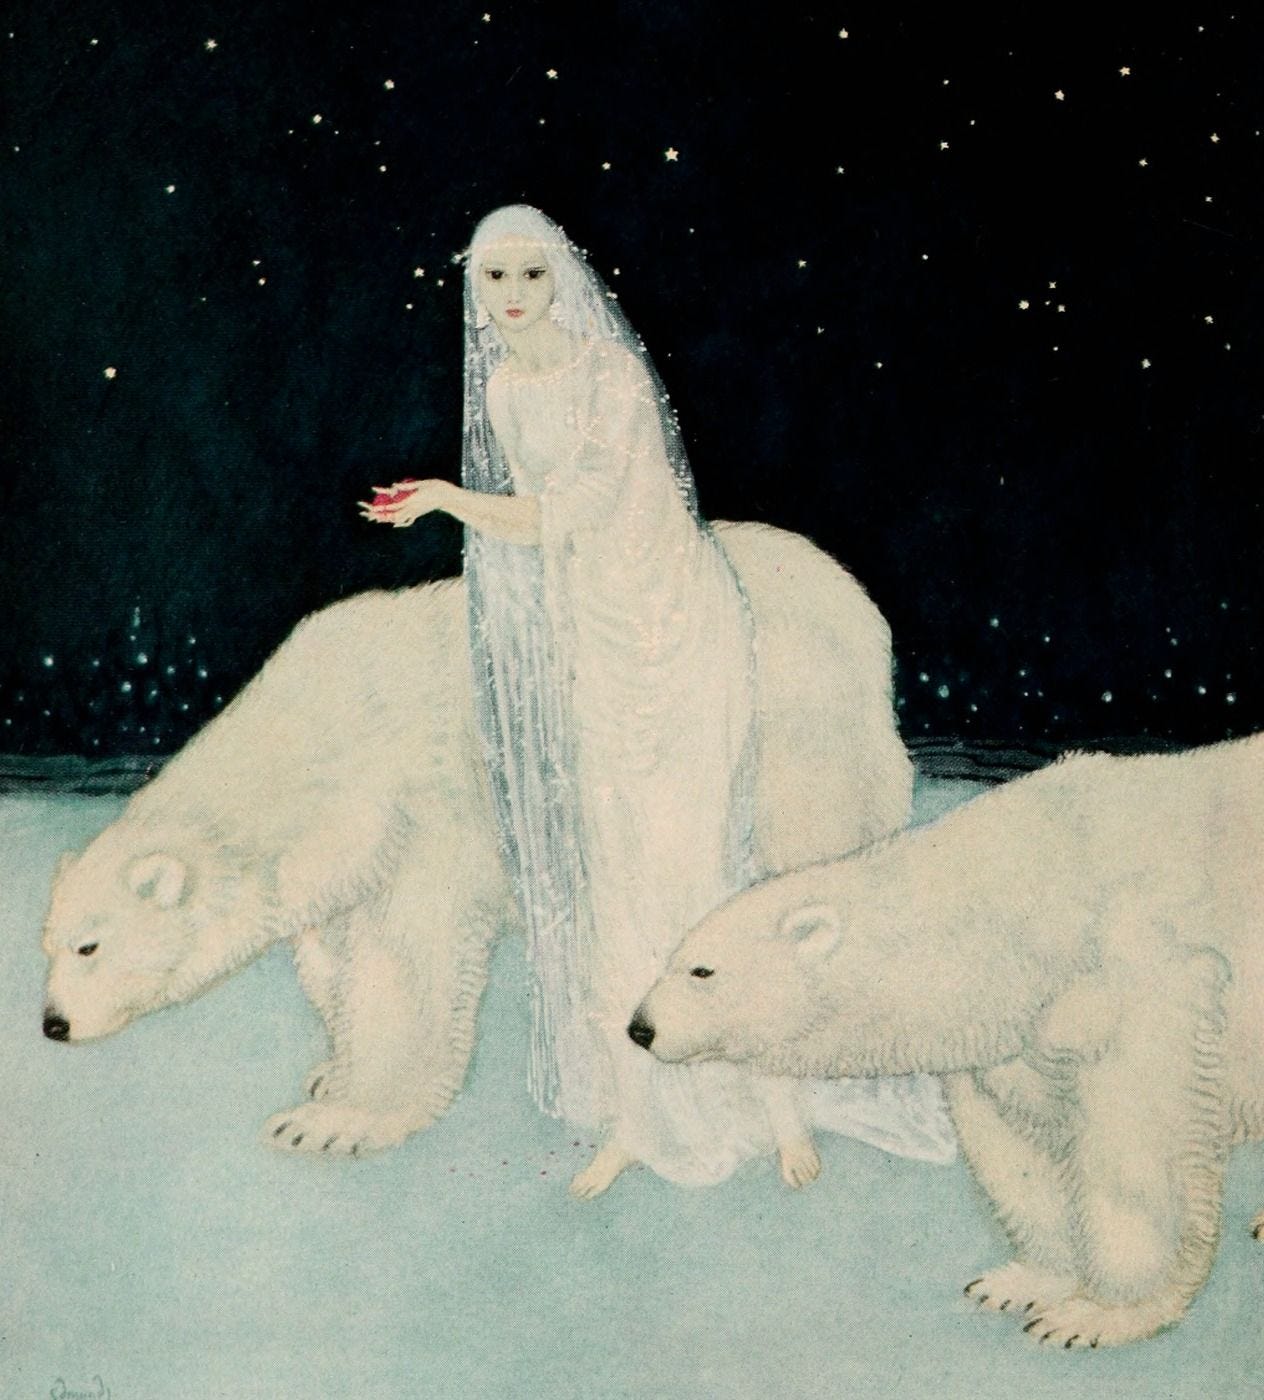 The Ice Maiden by Edmund Dulac | Fairytale art, Fairytale illustration, Edmund  dulac